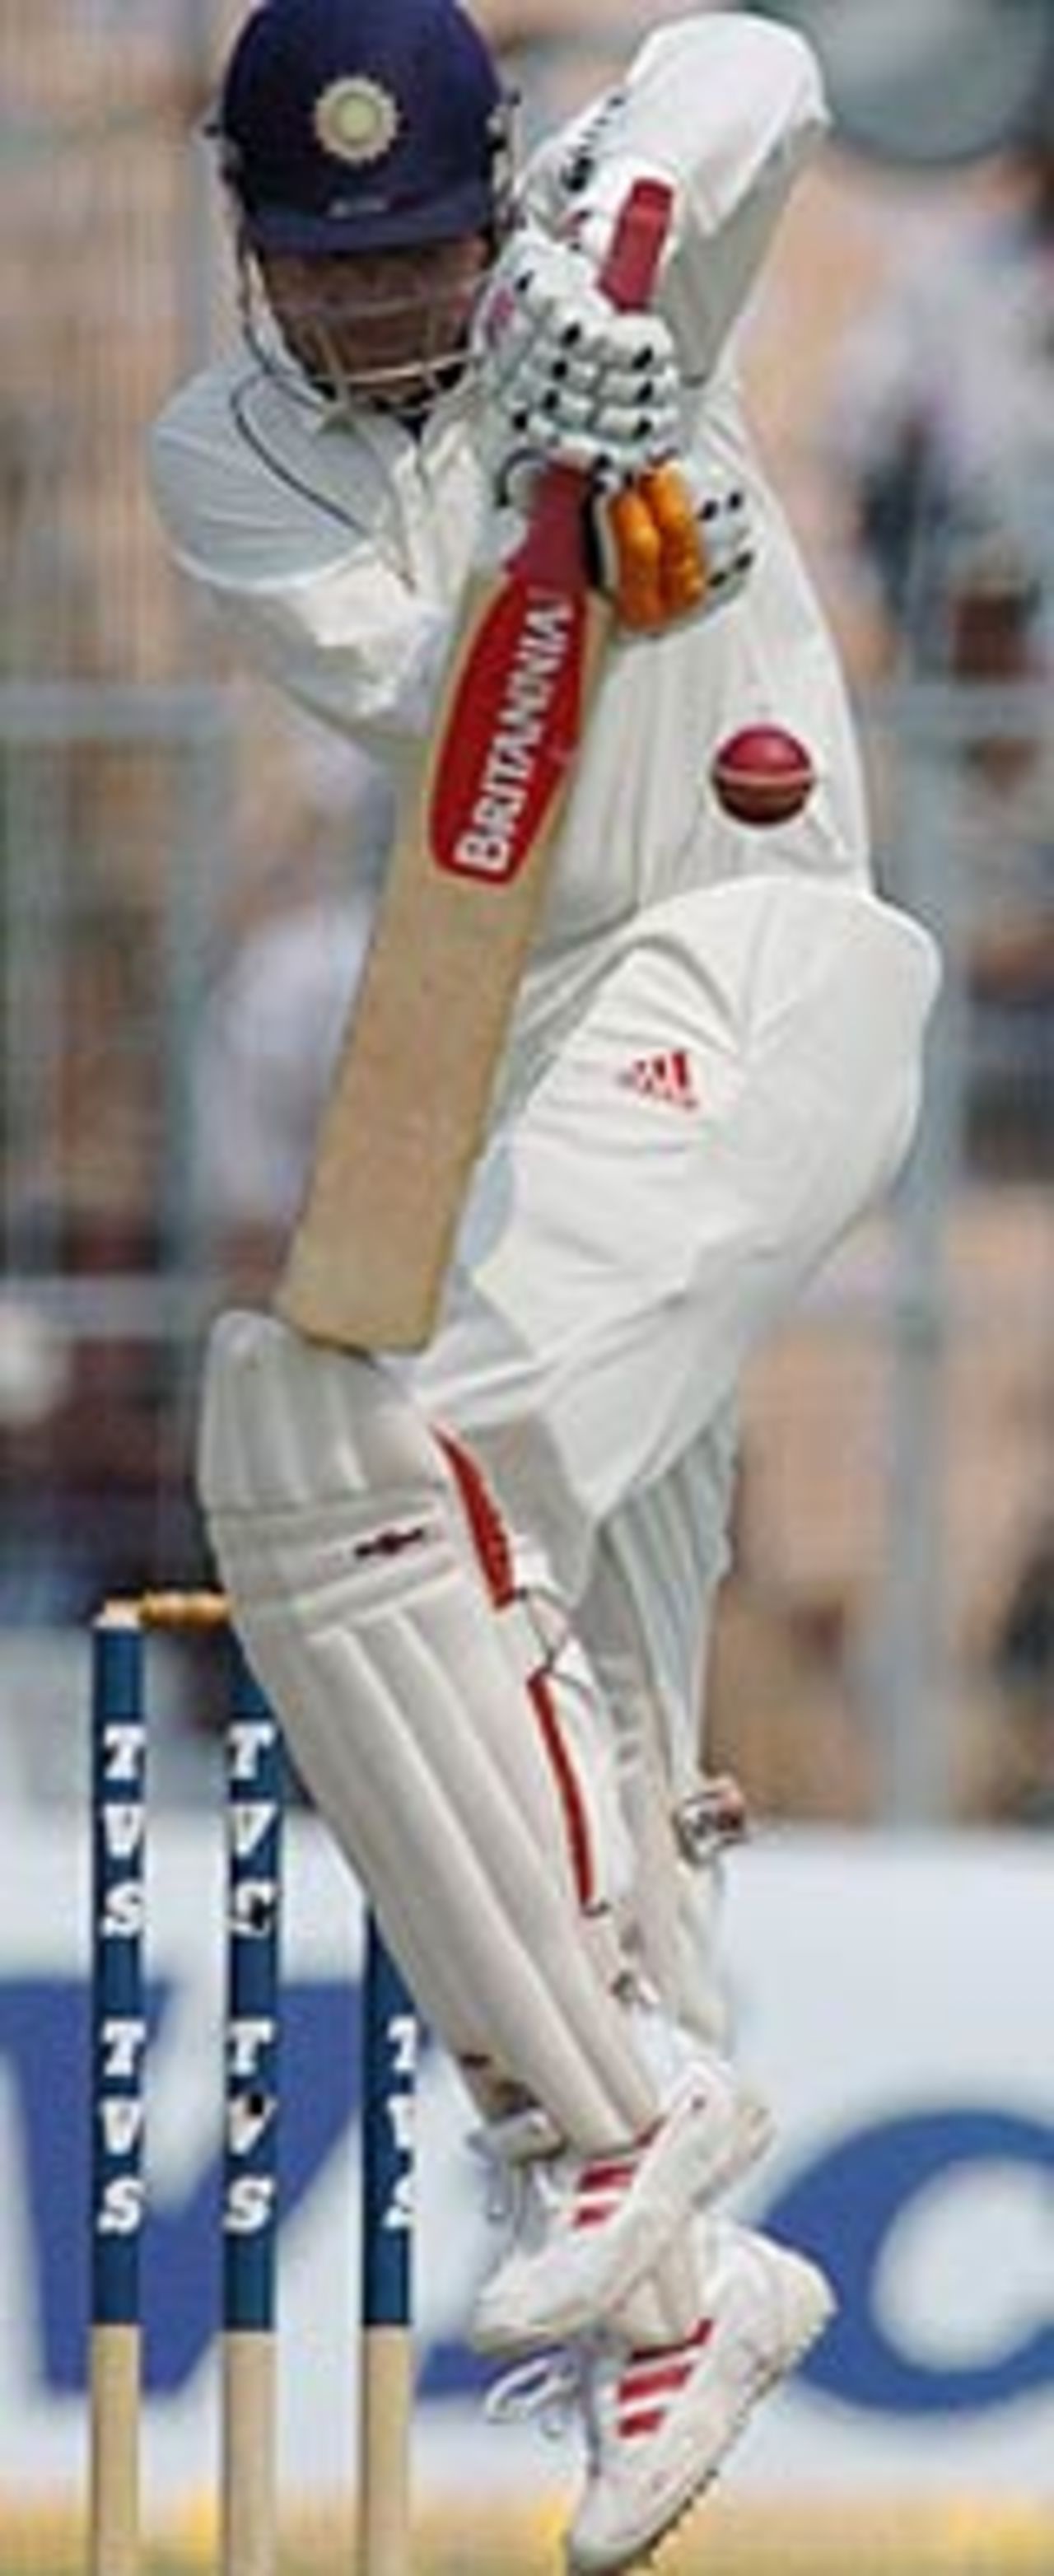 Virender Sehwag in terrific form, India v Pakistan, 2nd Test, Kolkata, 1st day, March 16, 2005